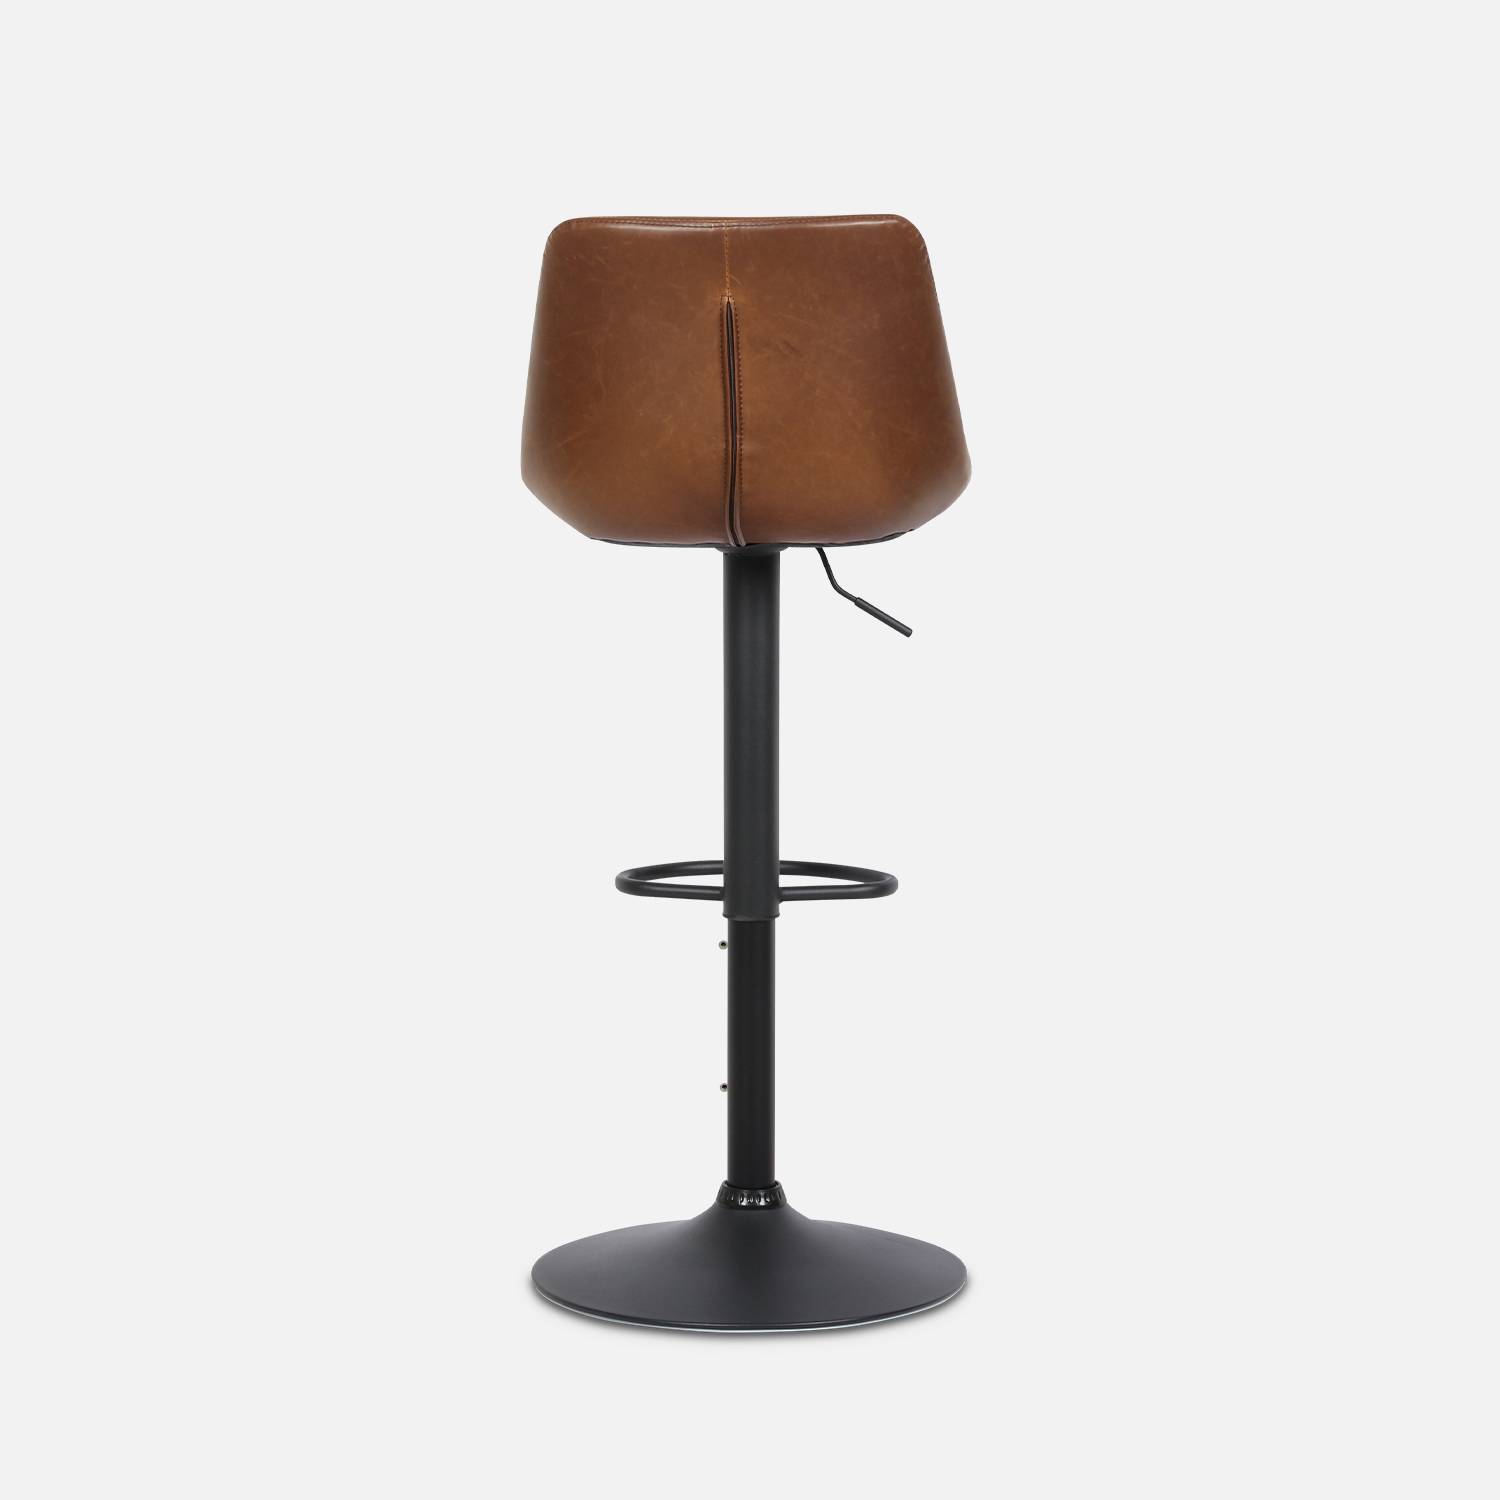 Pair of faux leather, square backrest, adjustable bar stools, seat height 61.5 - 83.5cm - Noah - Brown,sweeek,Photo6